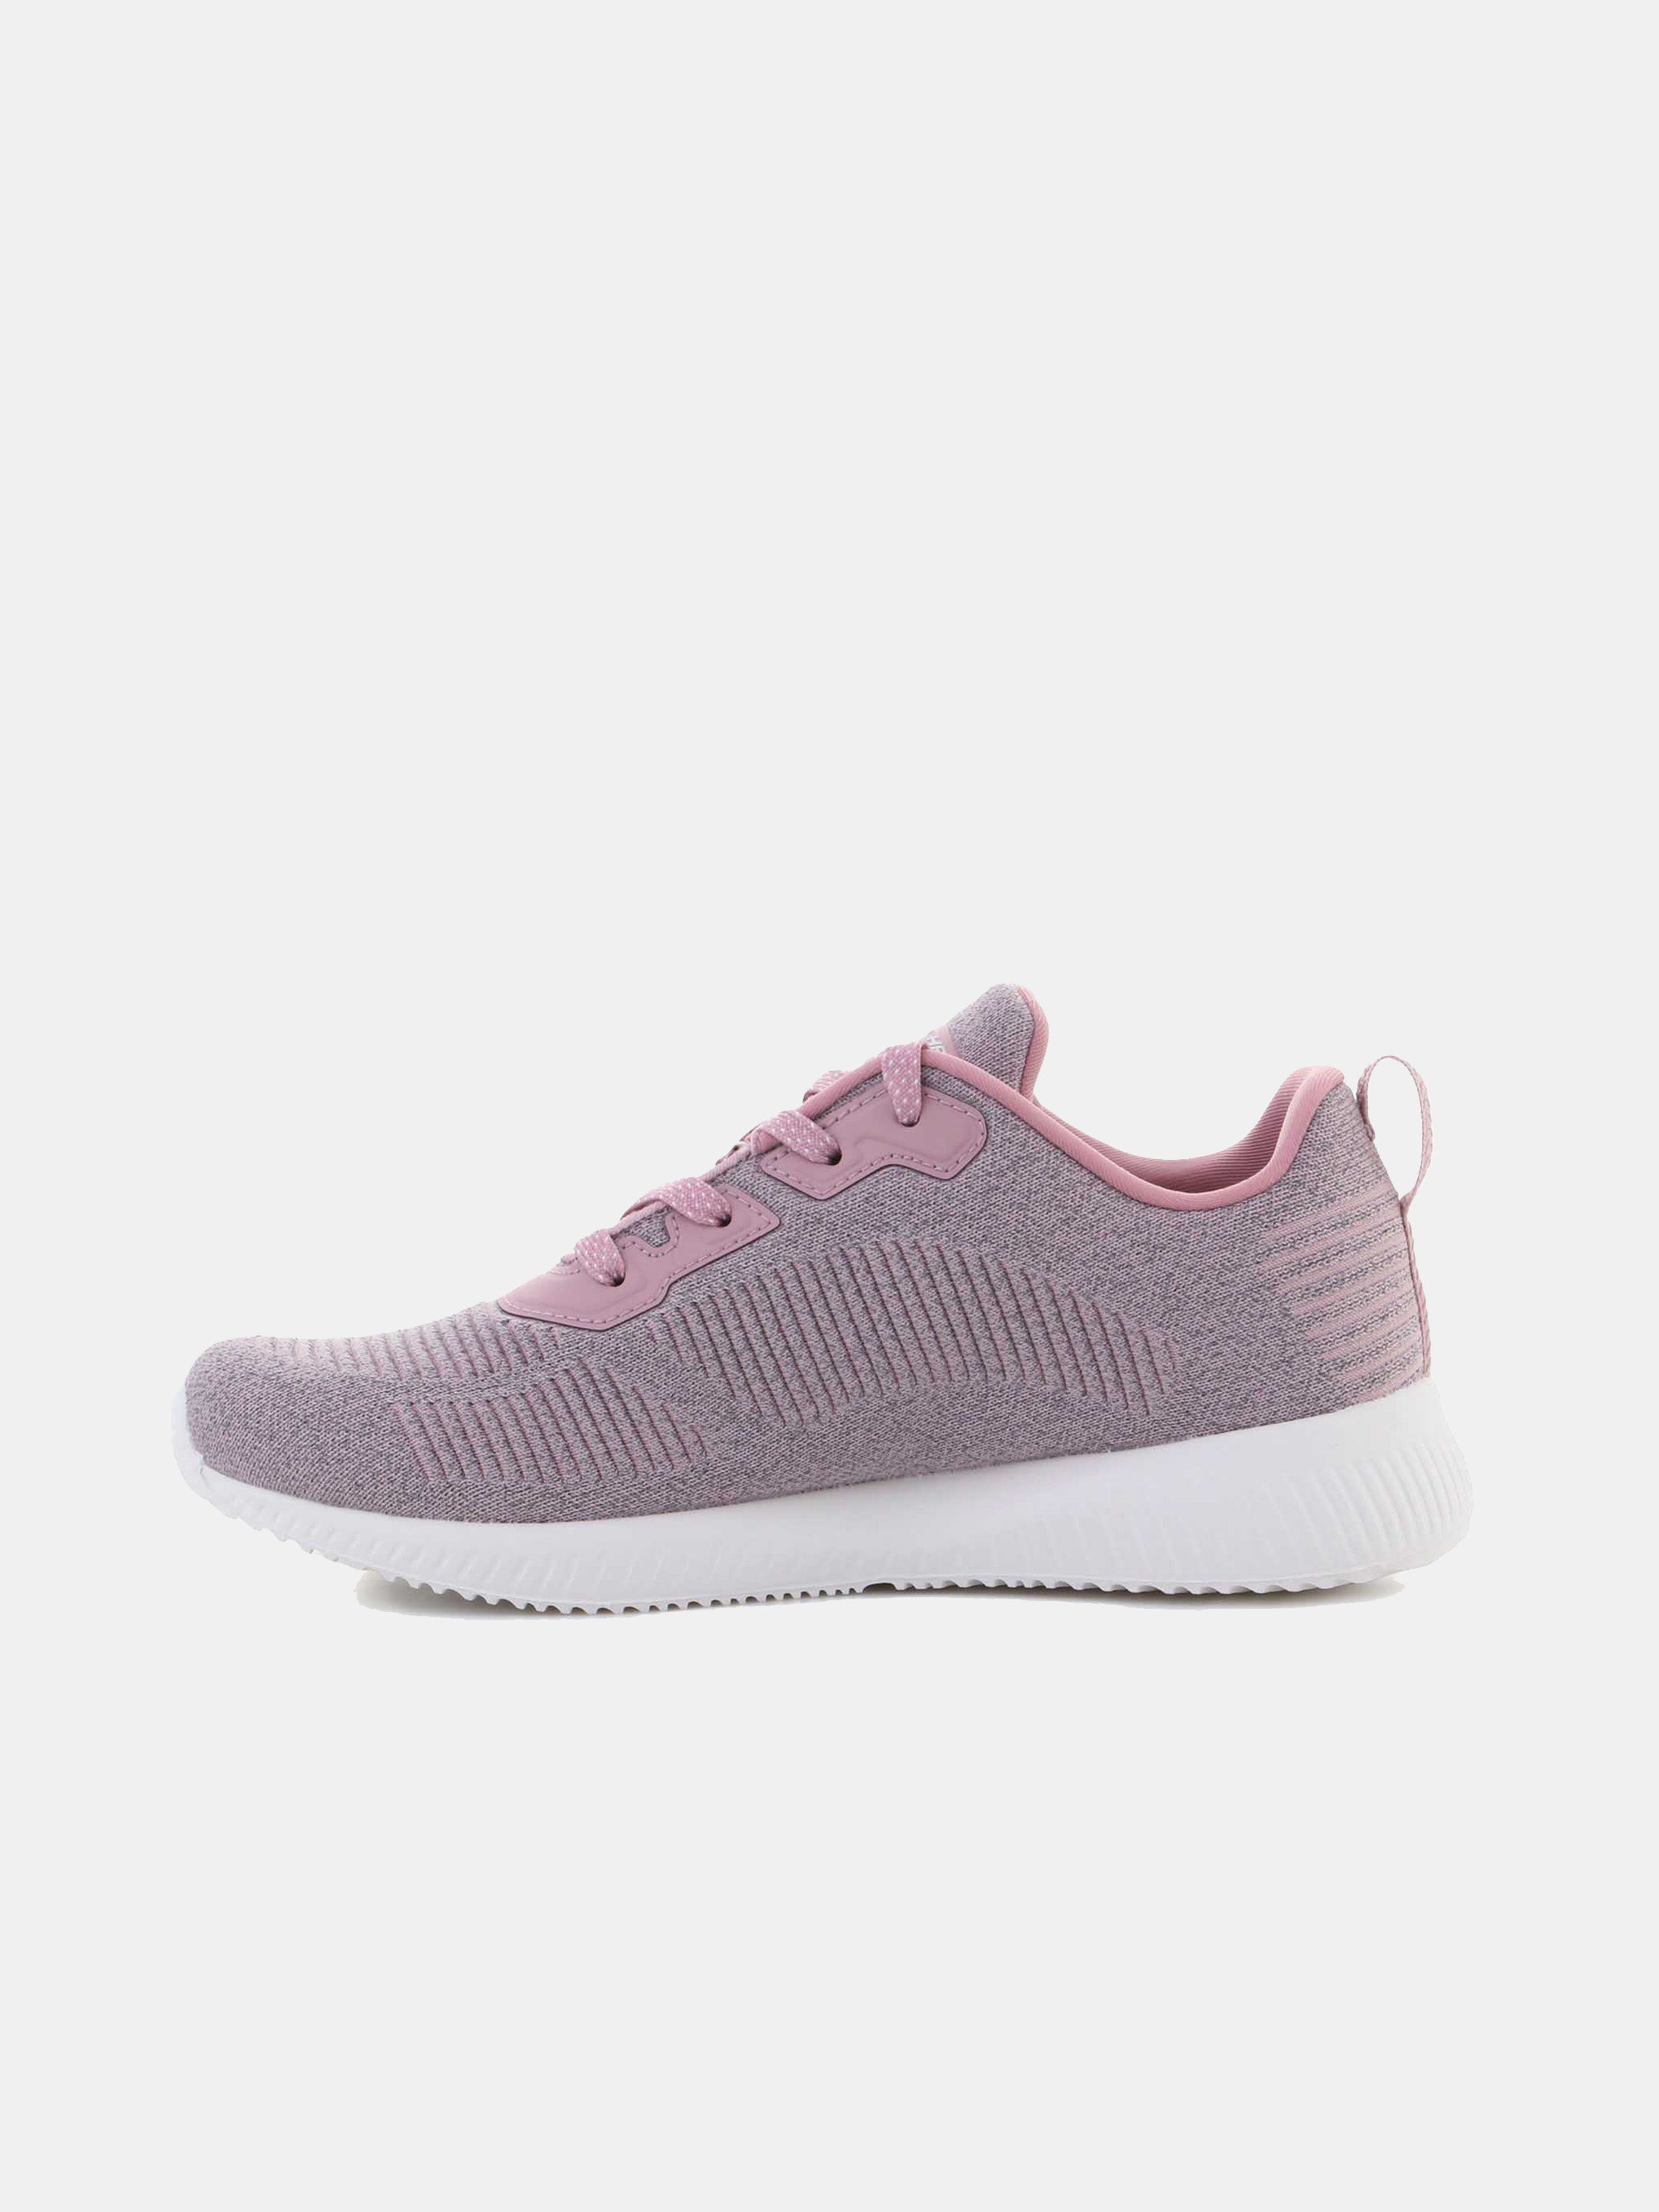 Skechers Women's BOBS Sport Squad - Ghost Star Trainers #color_Purple